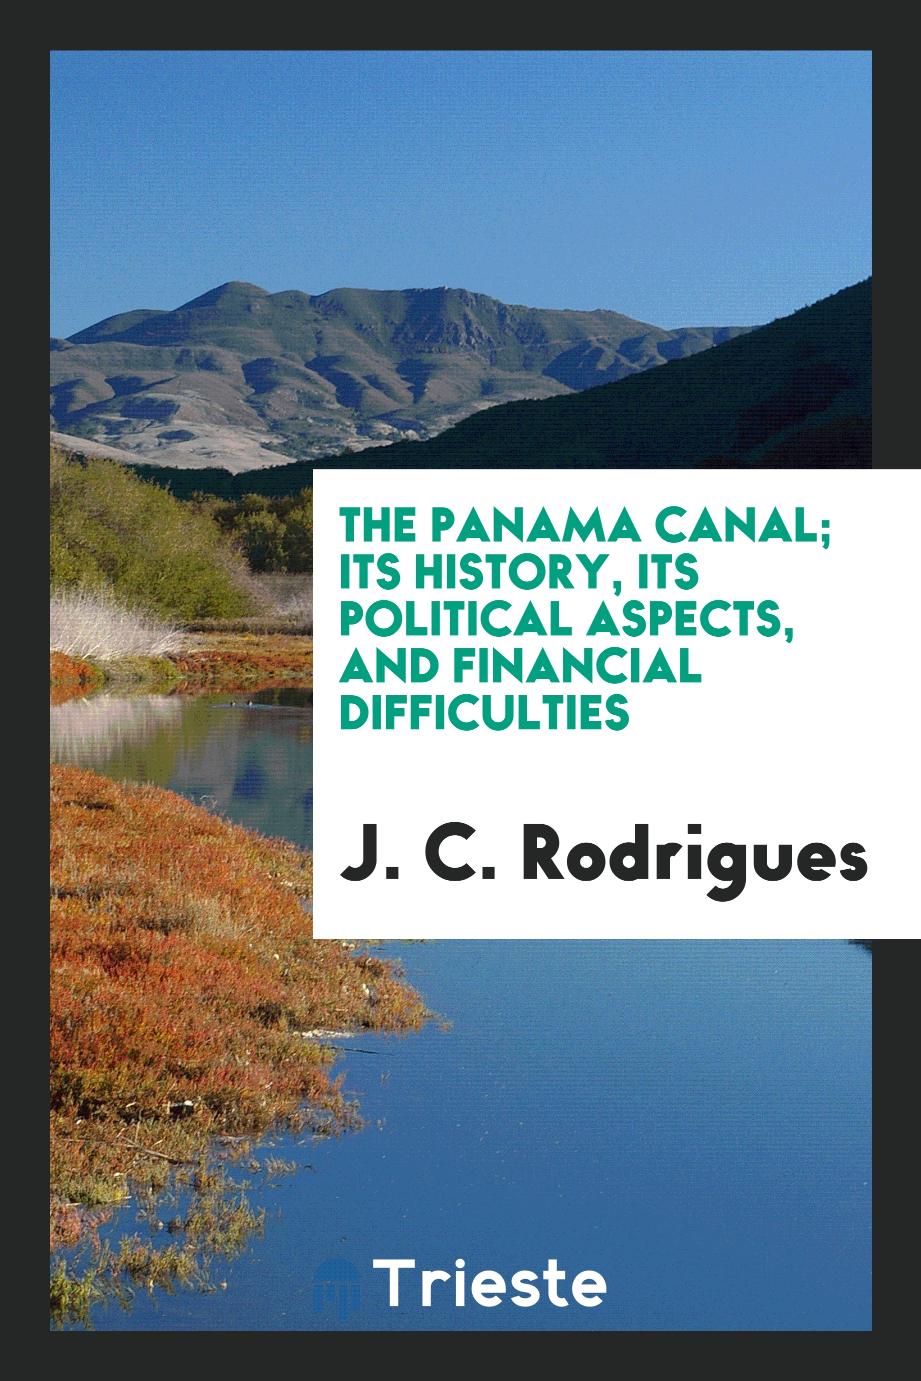 The Panama canal; its history, its political aspects, and financial difficulties